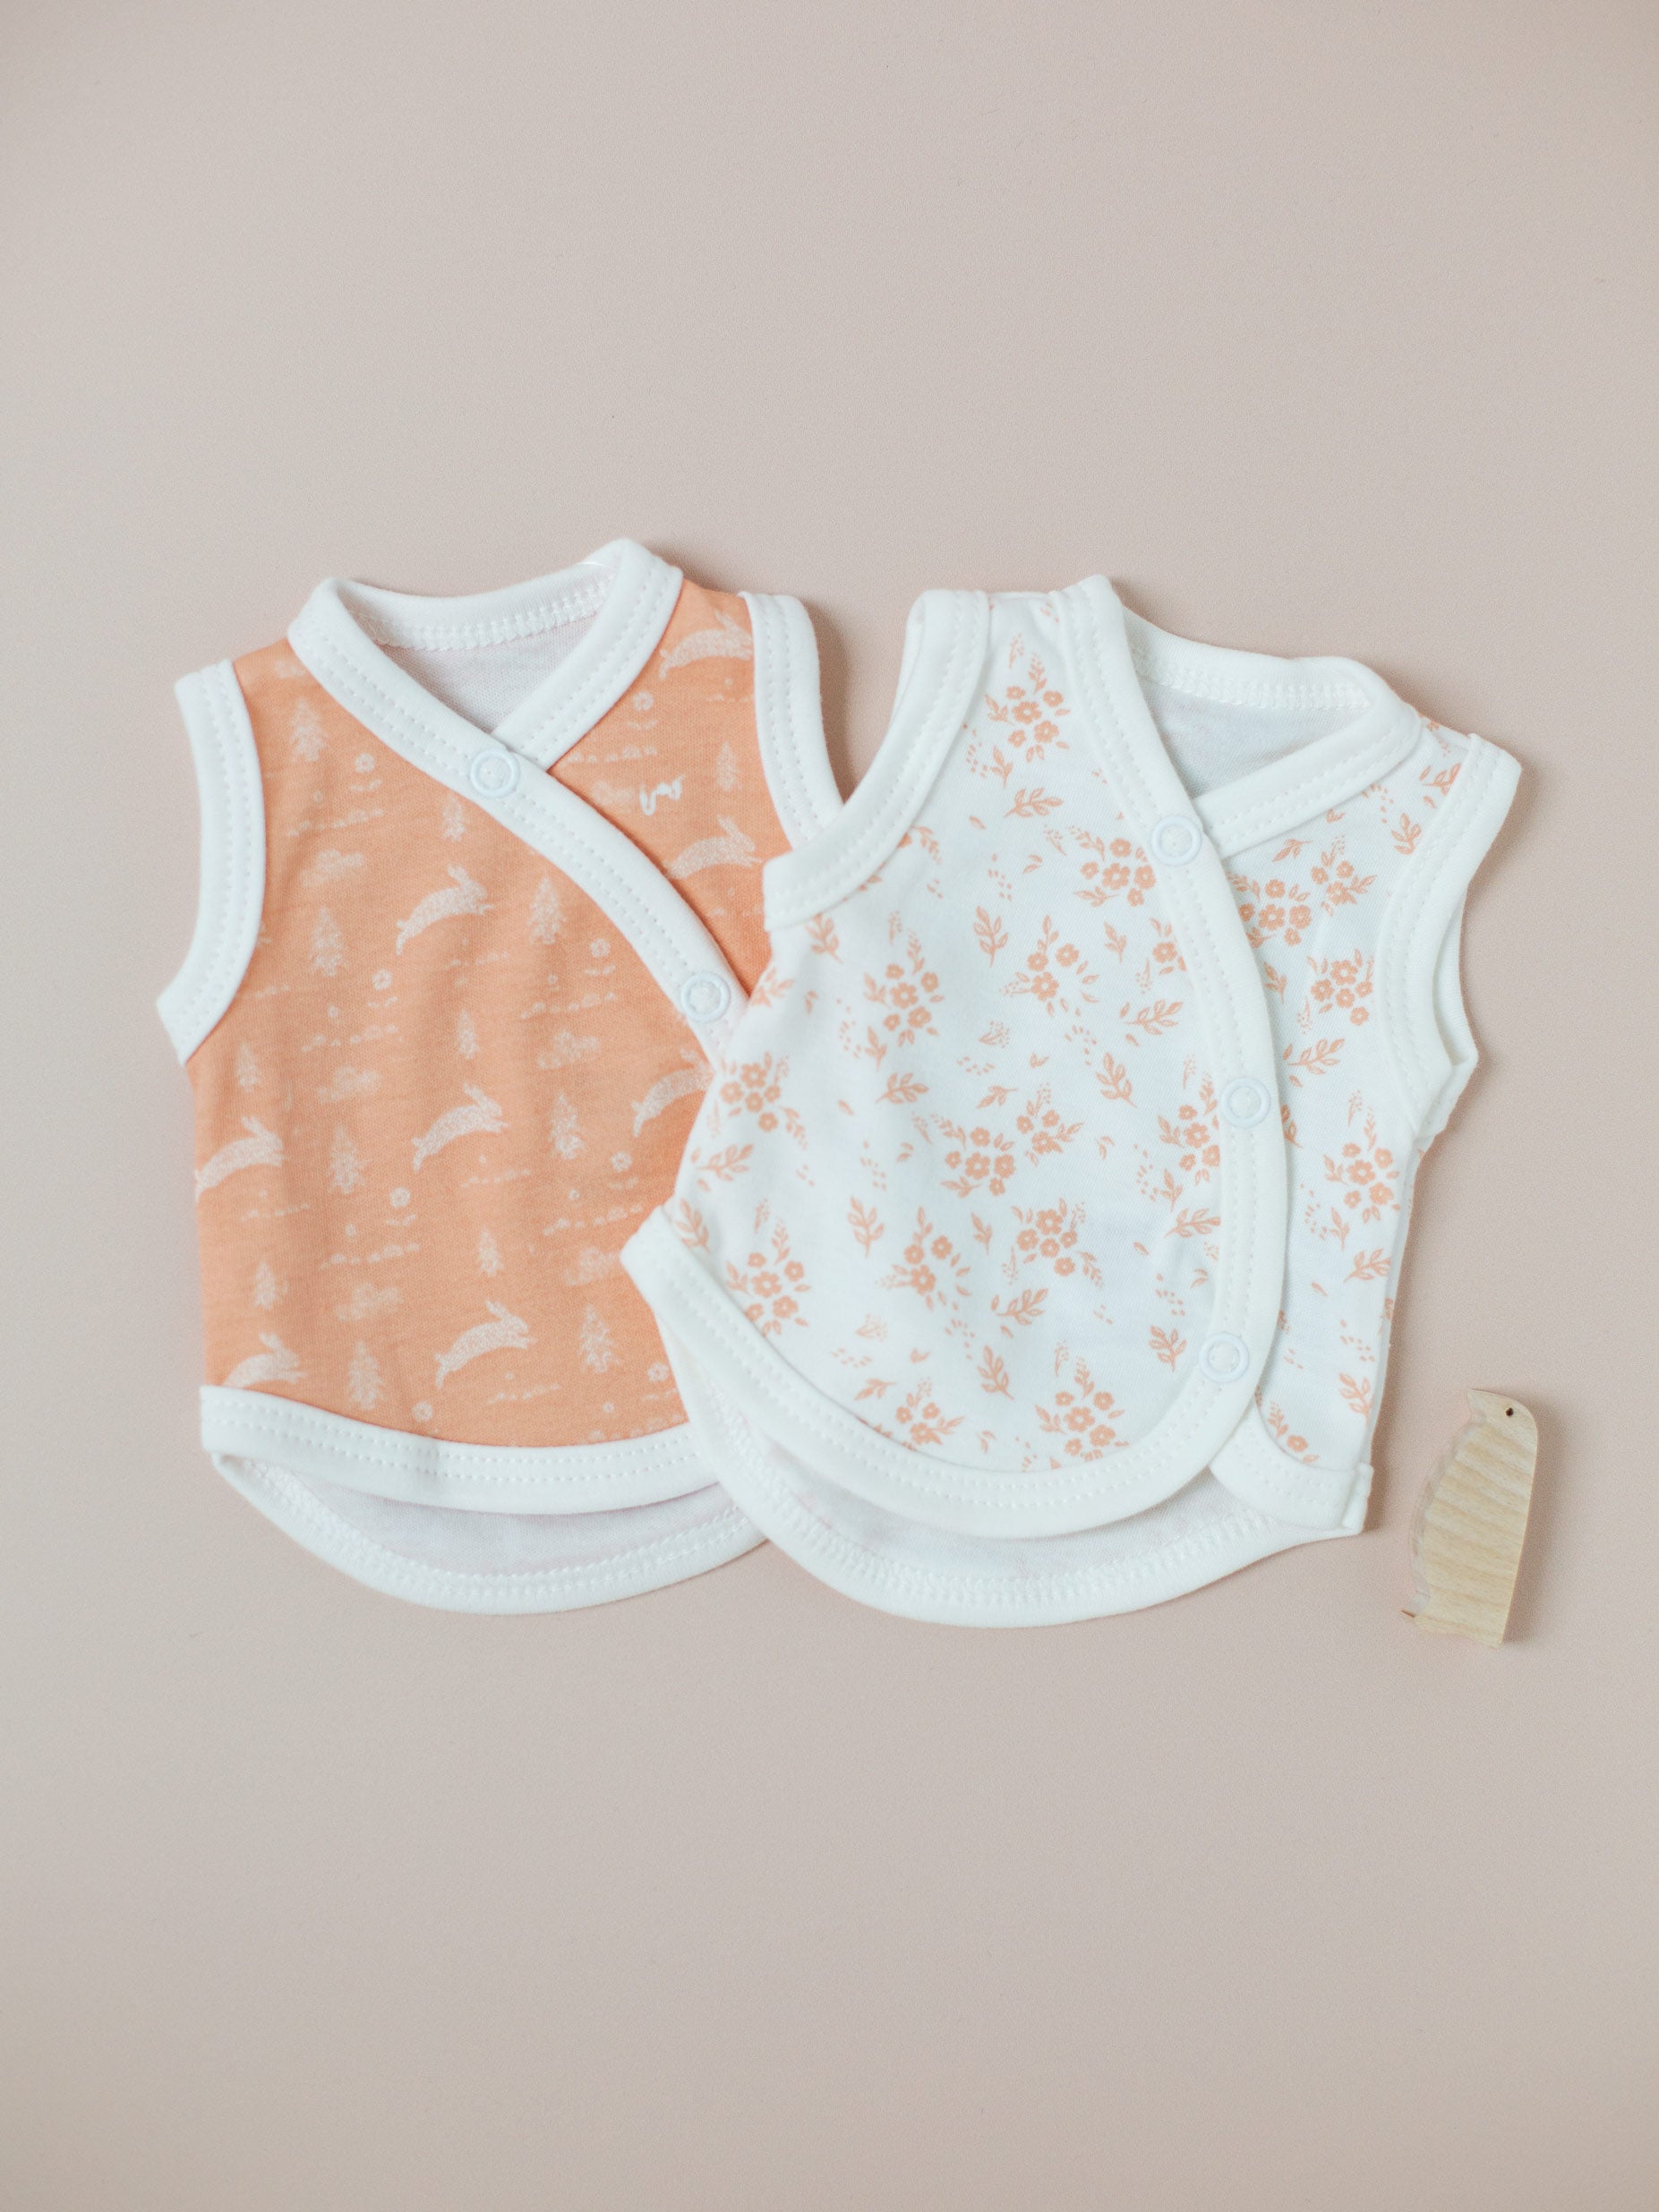 2 Pack Incubator Vest Set, Leaping Bunnies and Apricot Floral, 100% Organic Cotton - Set - Tiny & Small